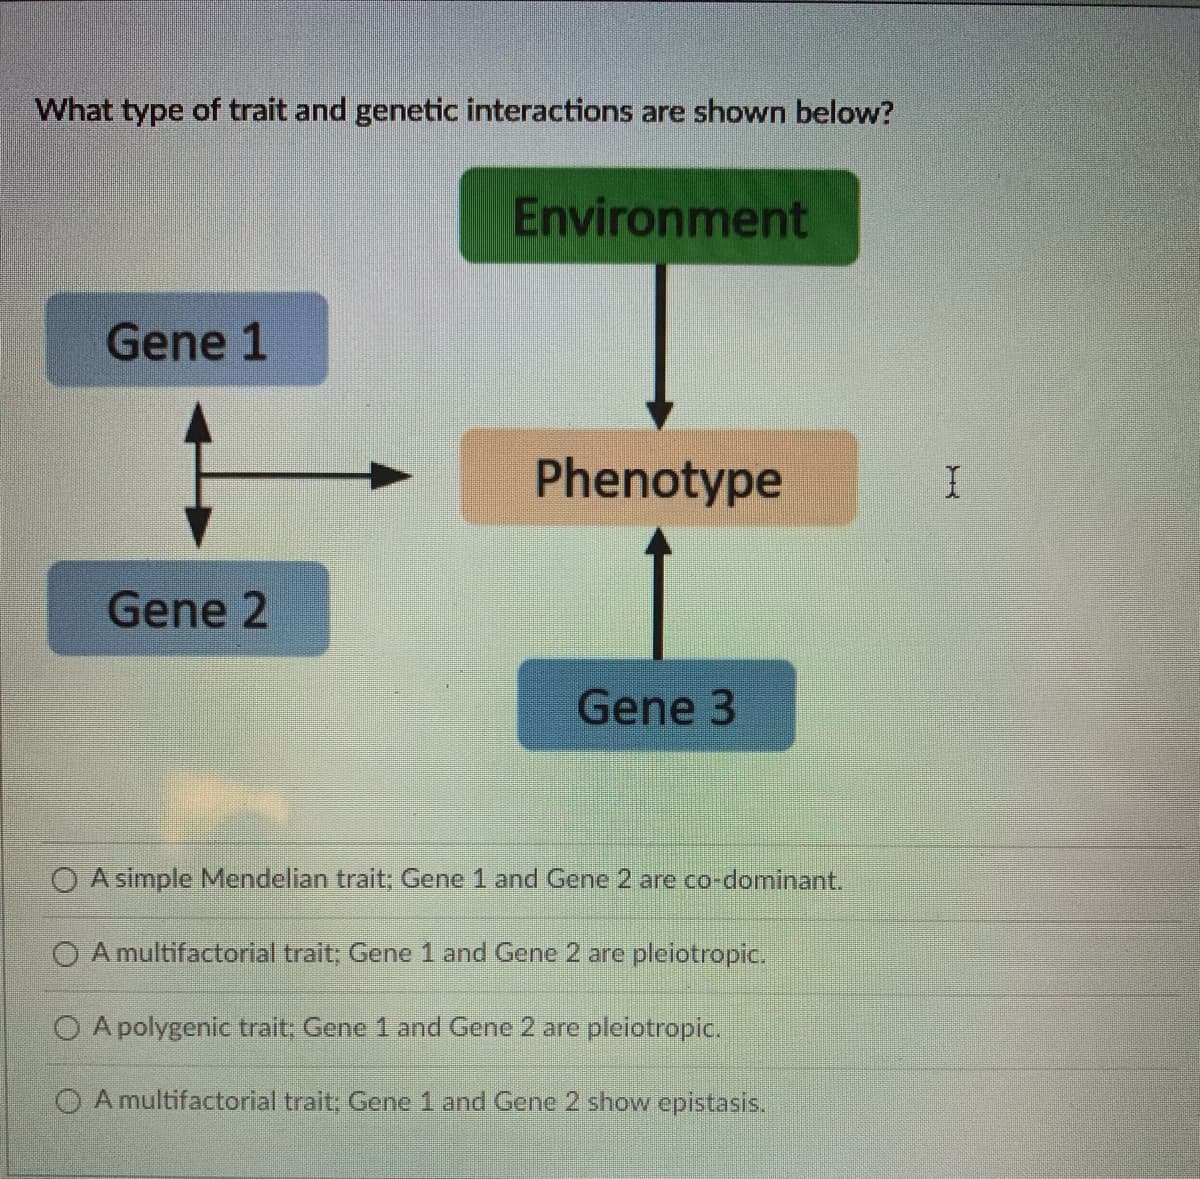 What type of trait and genetic interactions are shown below?
Environment
Gene 1
Phenotype
Gene 2
Gene 3
O A simple Mendelian trait; Gene 1 and Gene 2 are co-dominant.
O A multifactorial trait; Gene 1 and Gene 2 are pleiotropic.
O A polygenic trait; Gene 1 and Gene 2 are pleiotropic.
O A multifactorial trait; Gene 1 and Gene 2 show epistasis.
